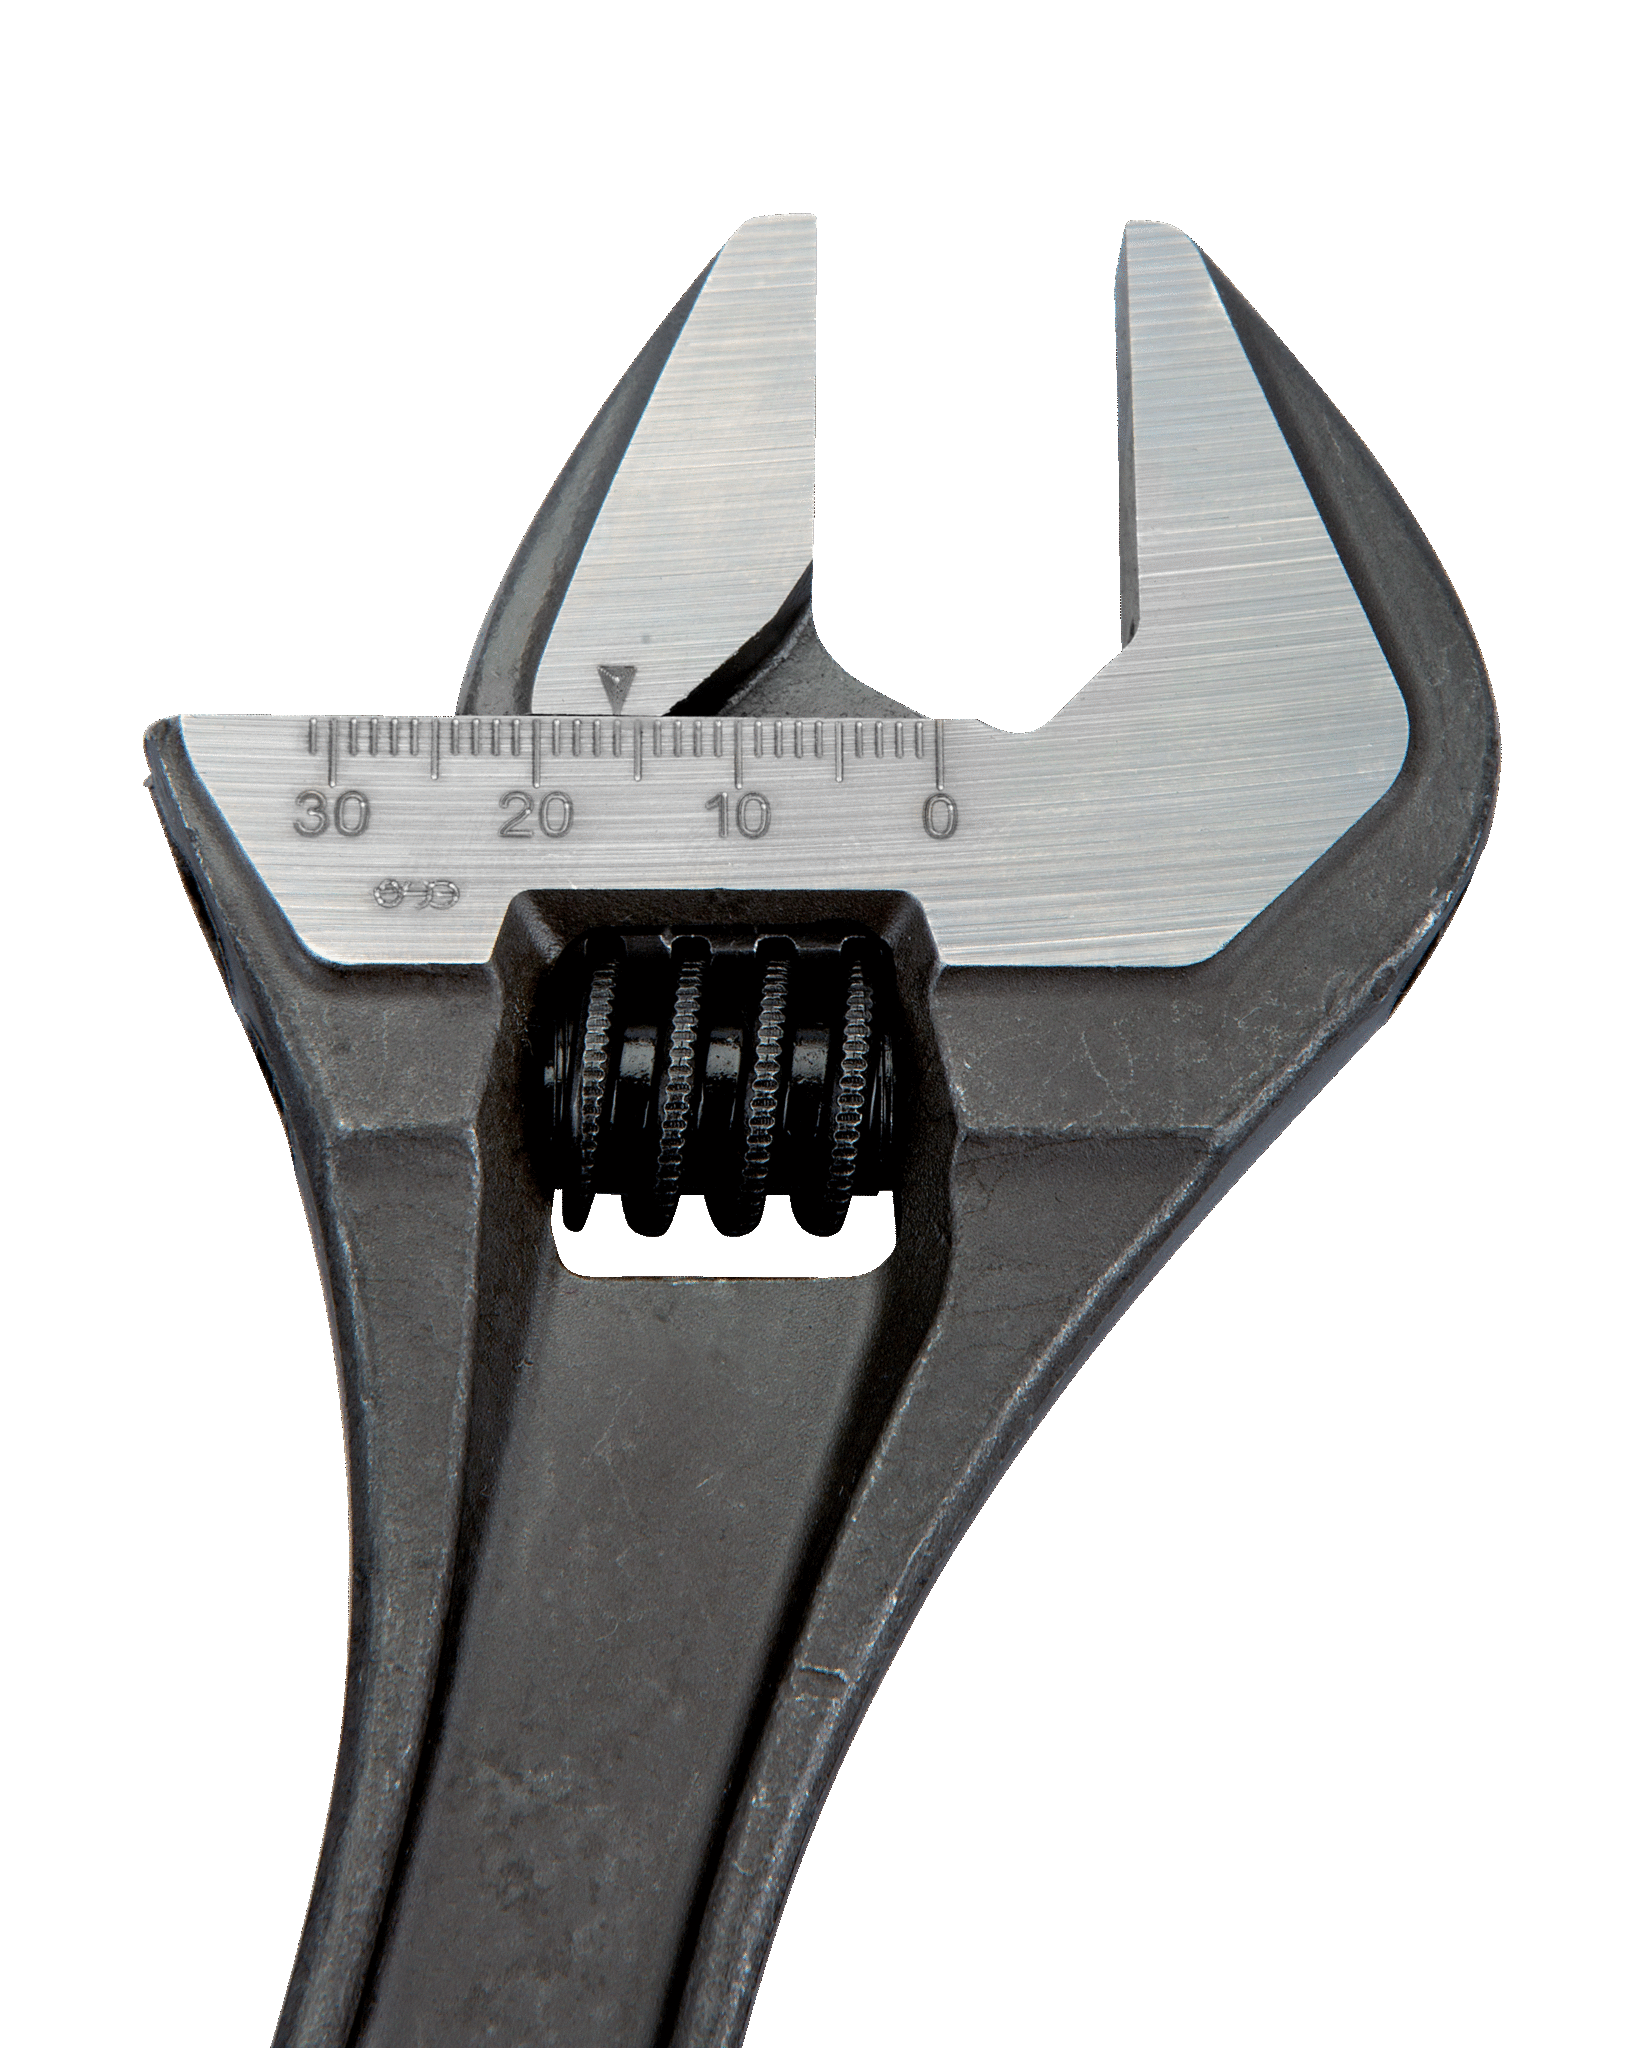 Central Nut Adjustable Wrenches with Phosphate Finish - 8071 by Bahco